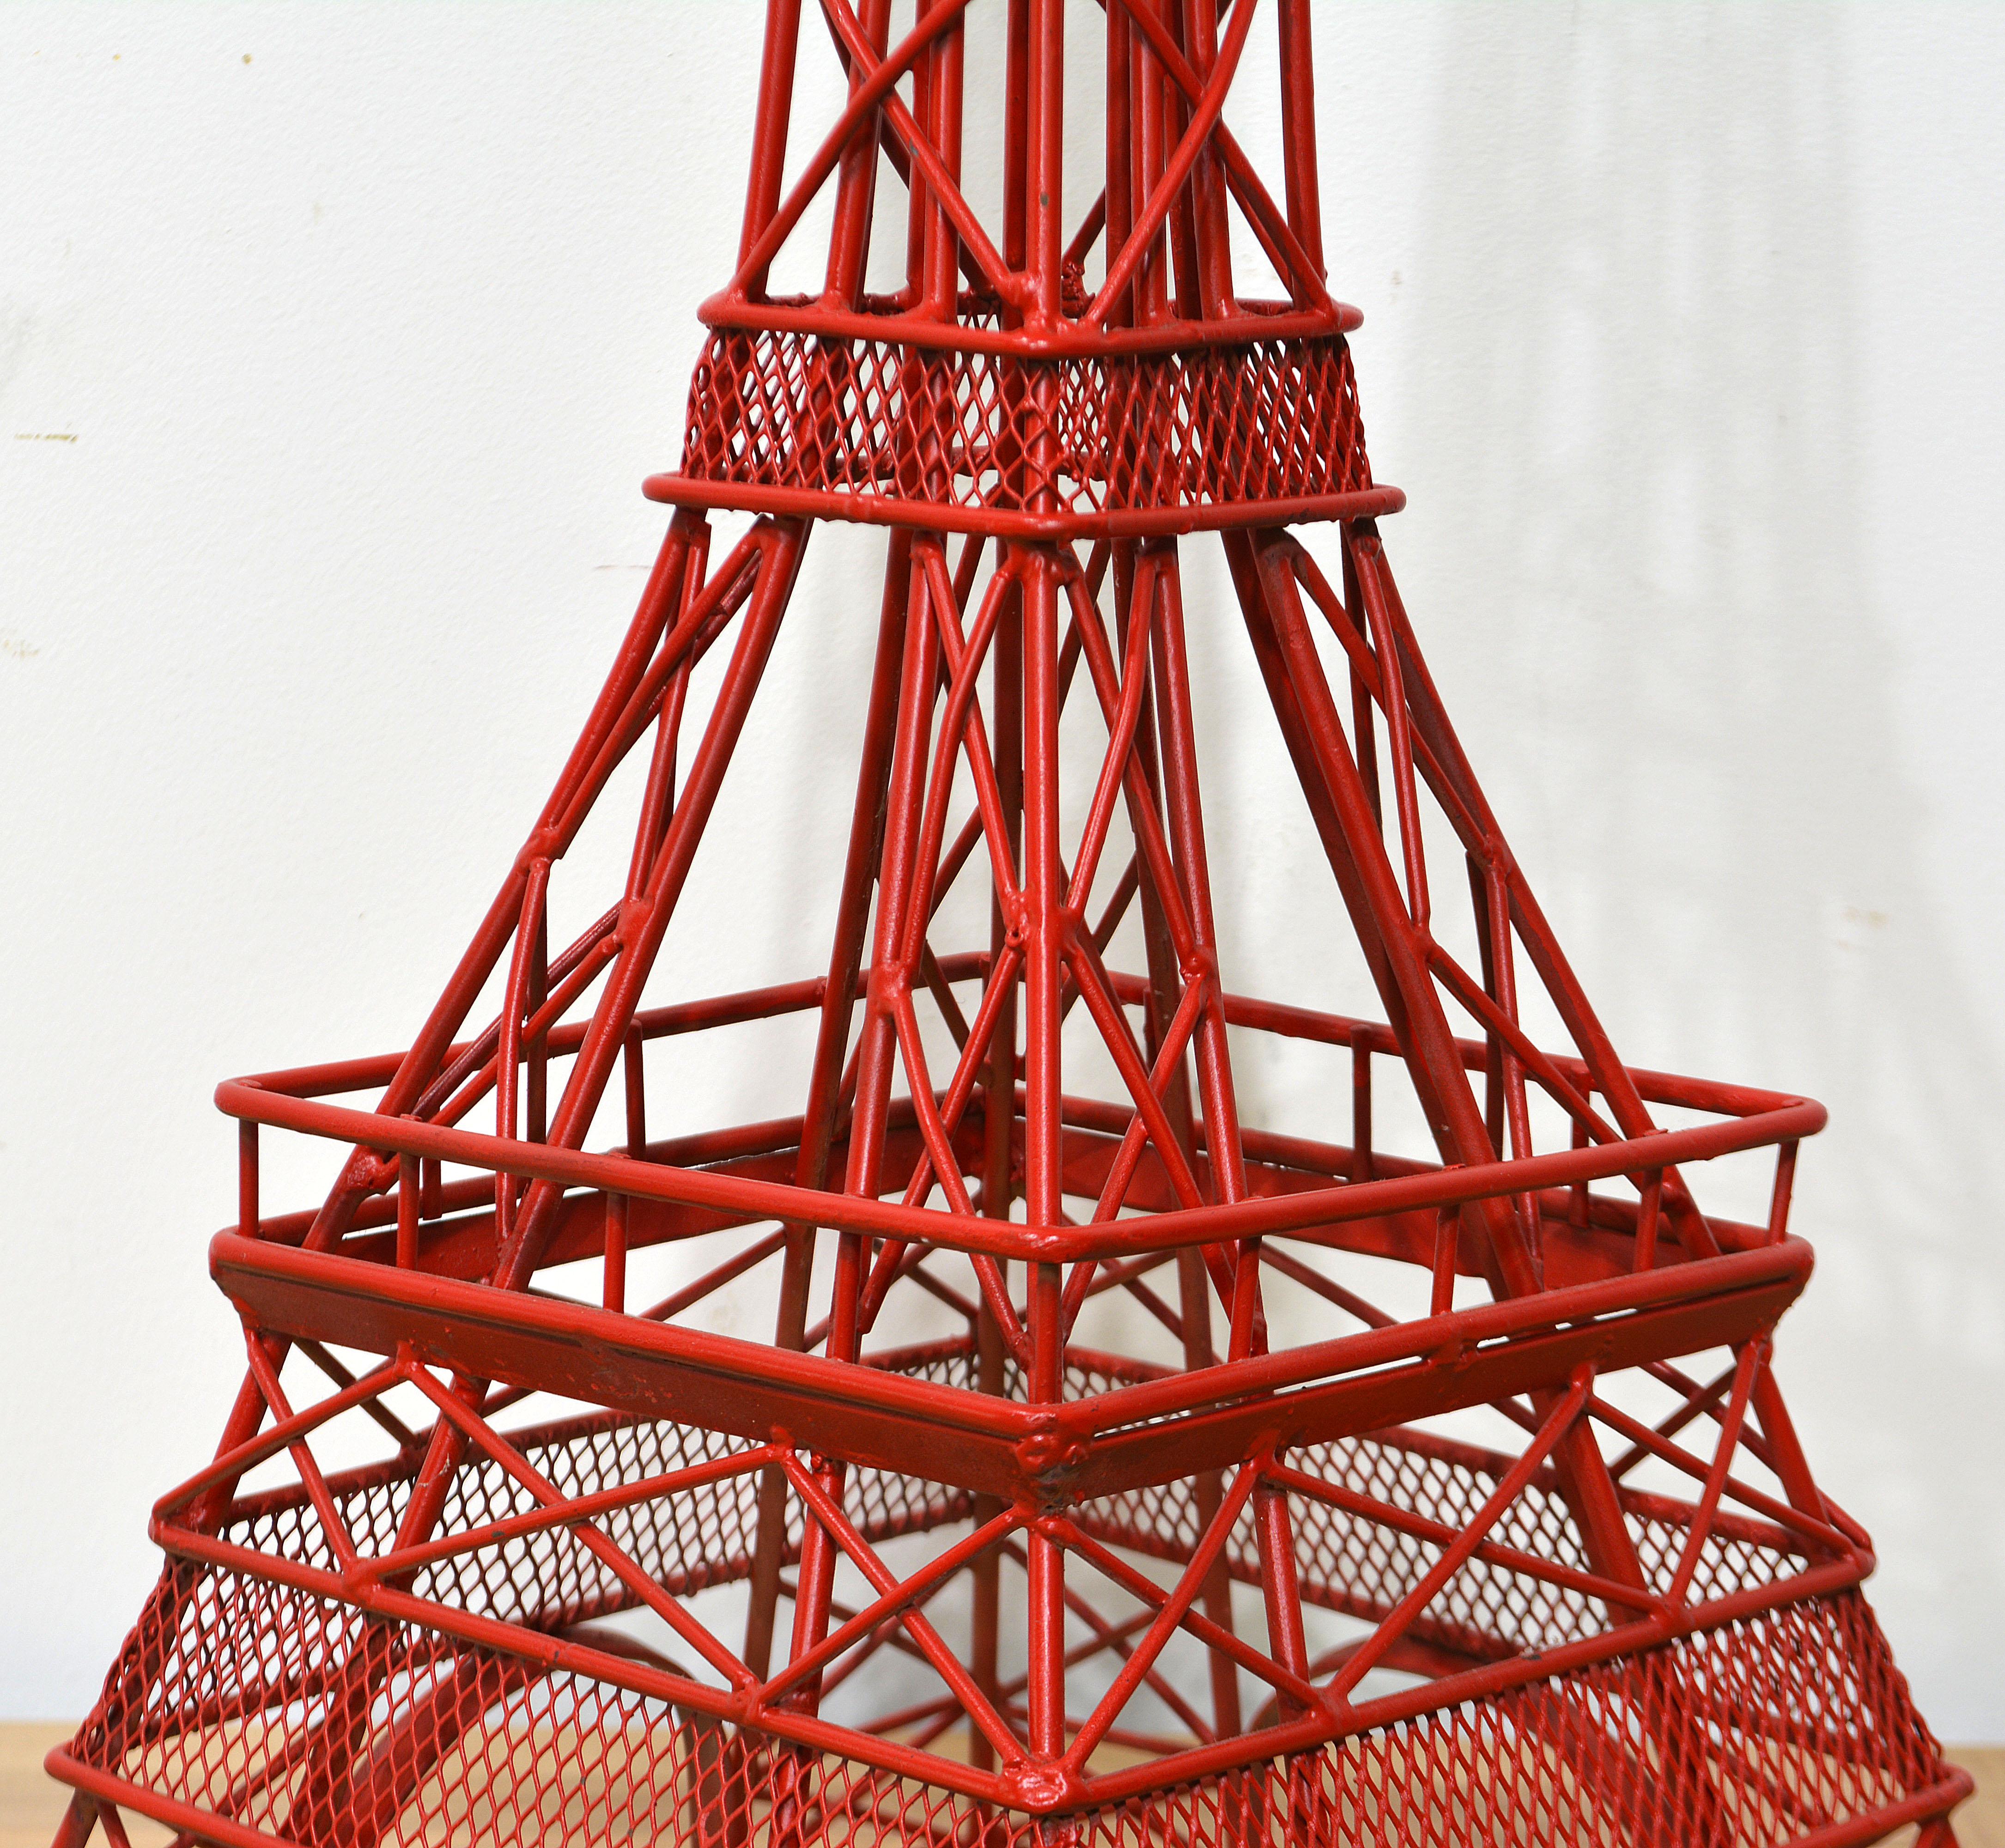 Tall Painted Decorative Steel Eifel Tower Inspired Lighthouse Sculpture or Model For Sale 2